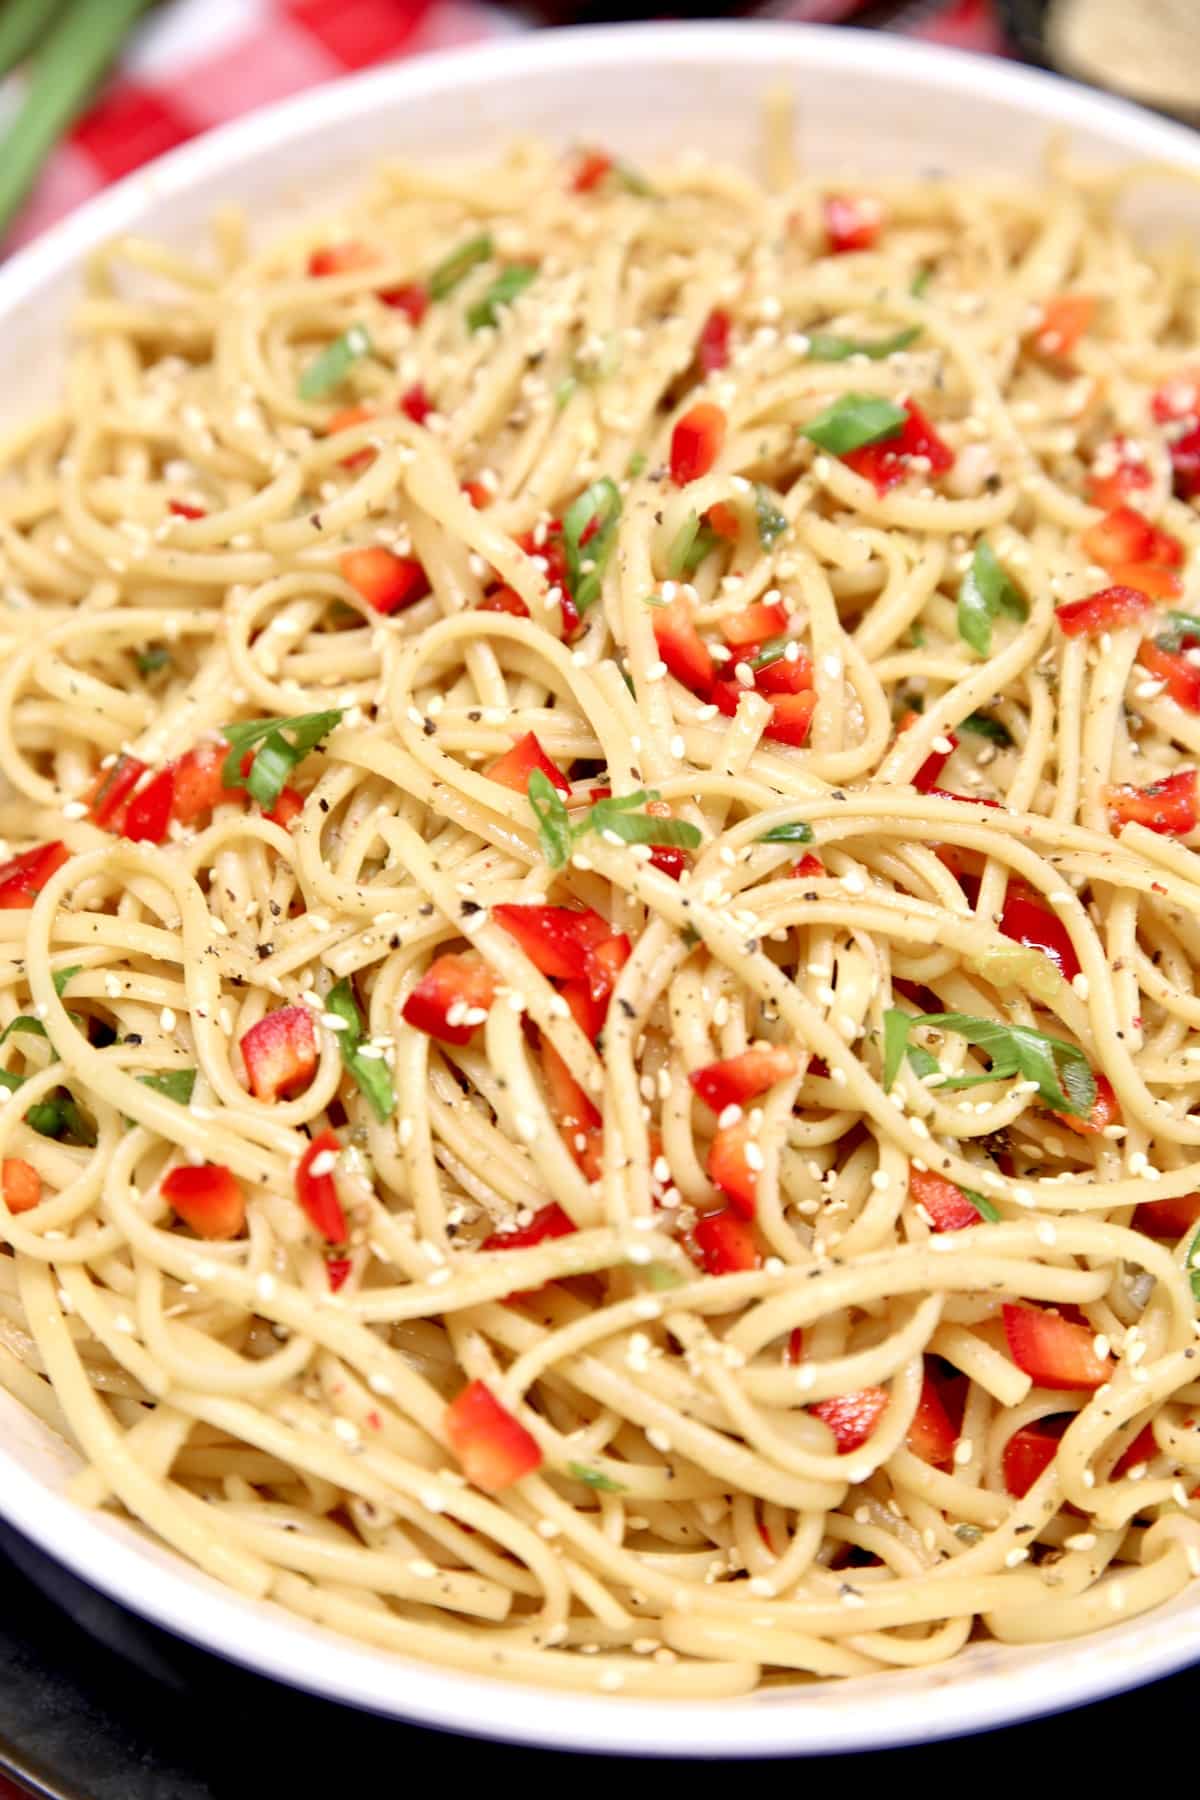 Bowl of pasta salad with red bell peppers. 